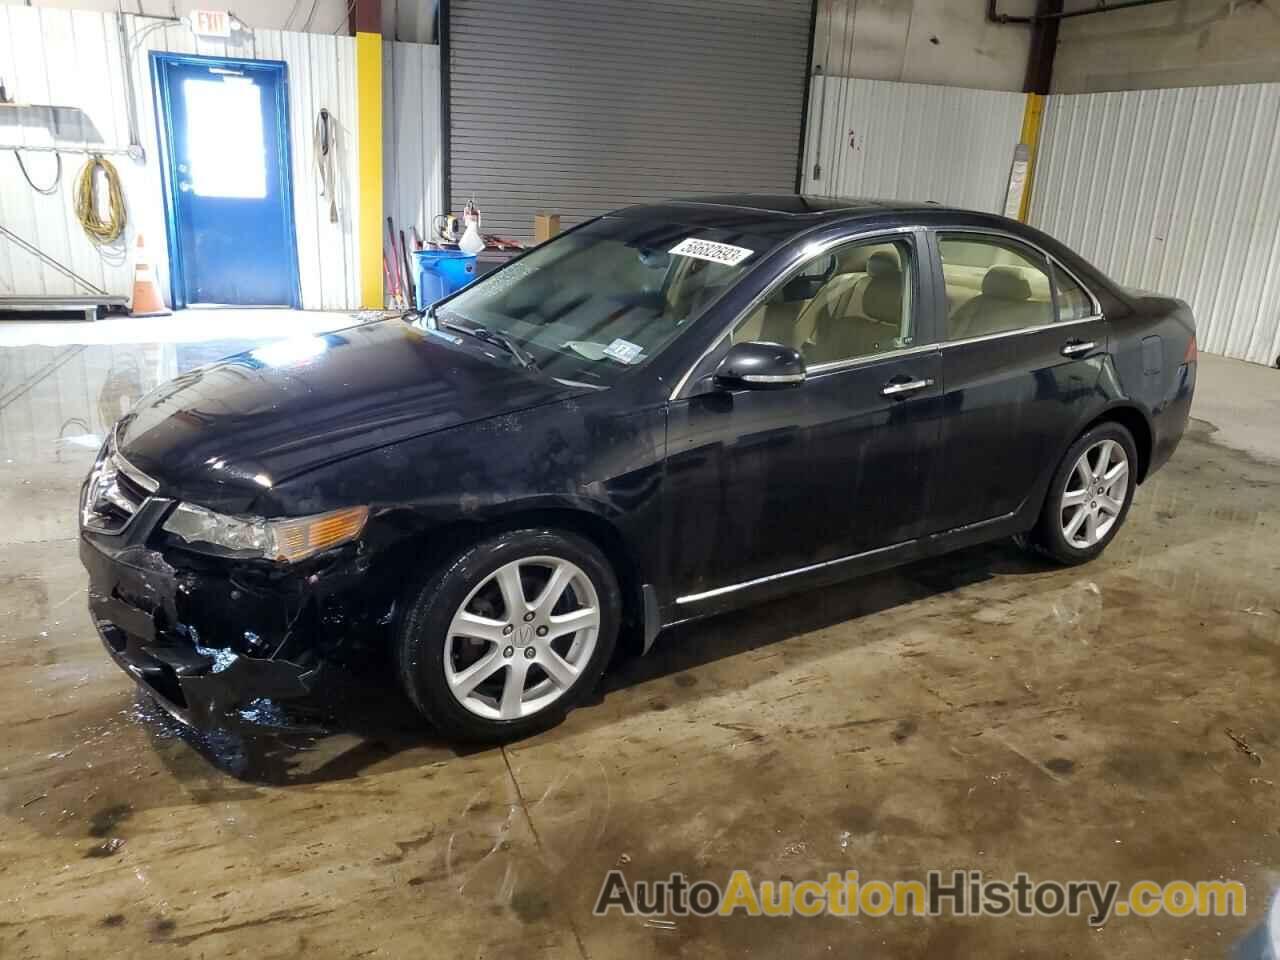 2005 ACURA TSX, JH4CL95965C020547